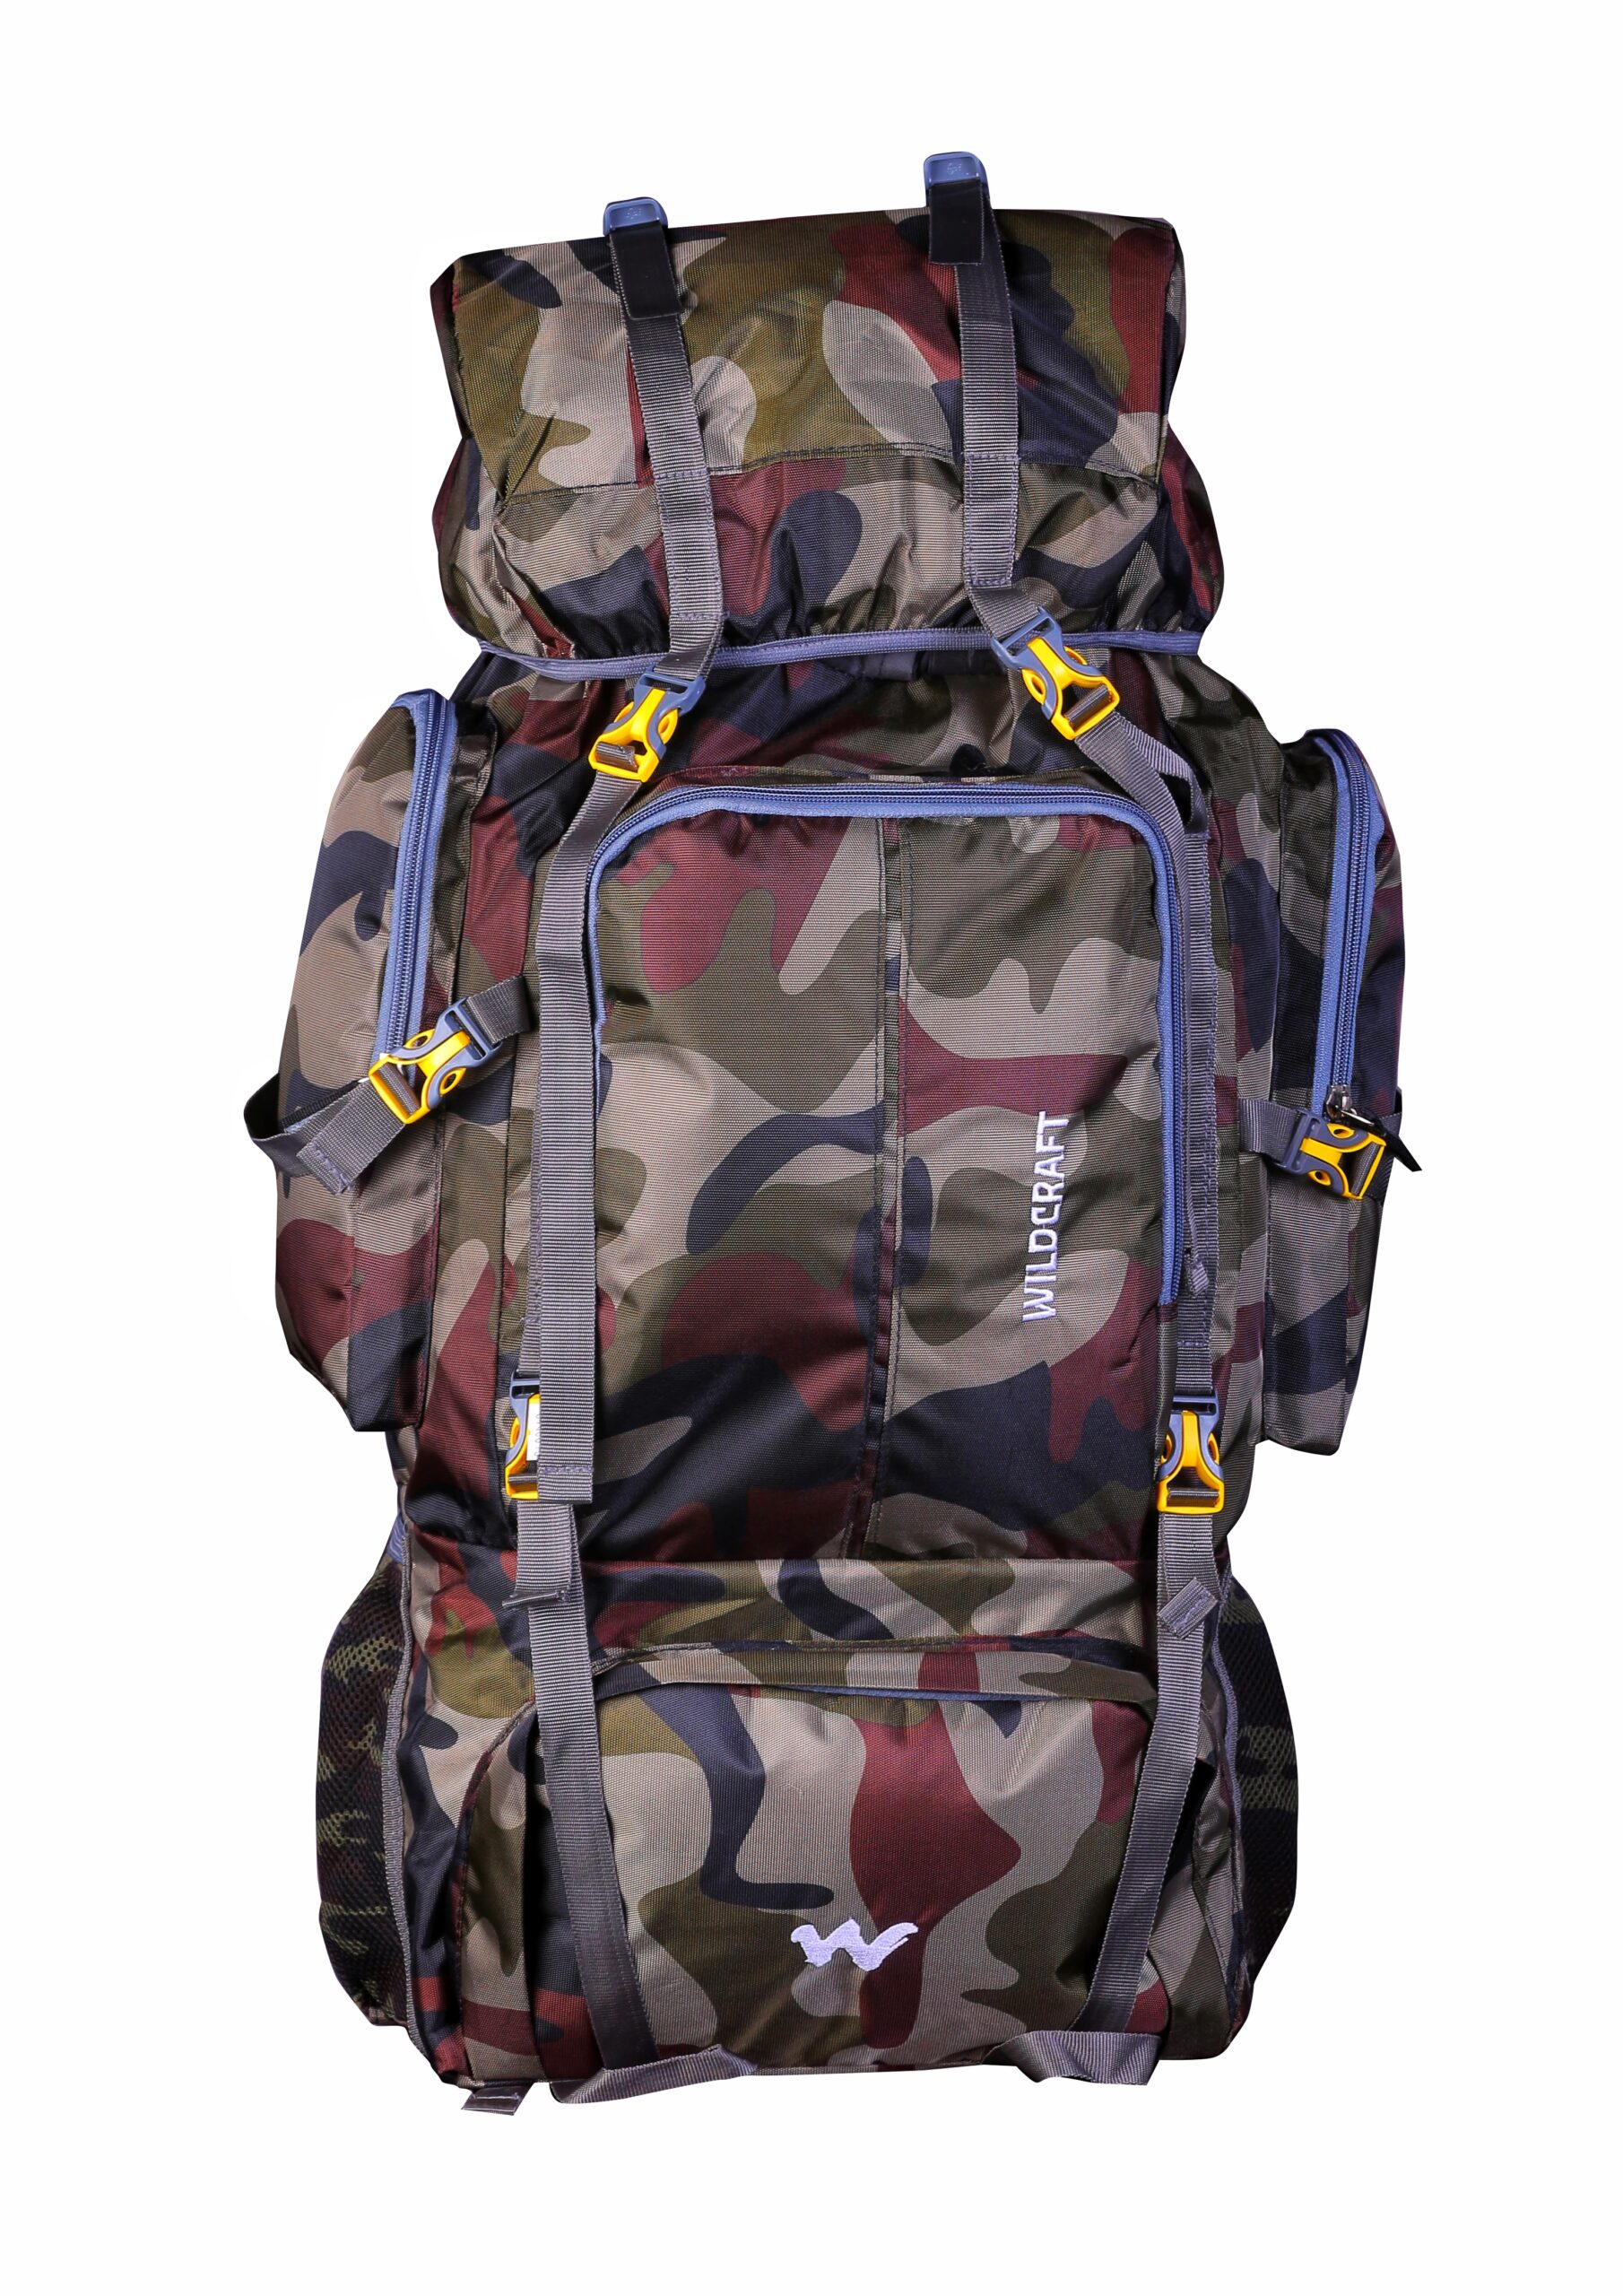 Wildcraft Black Trolley Bag Price in India, Full Specifications & Offers |  DTashion.com